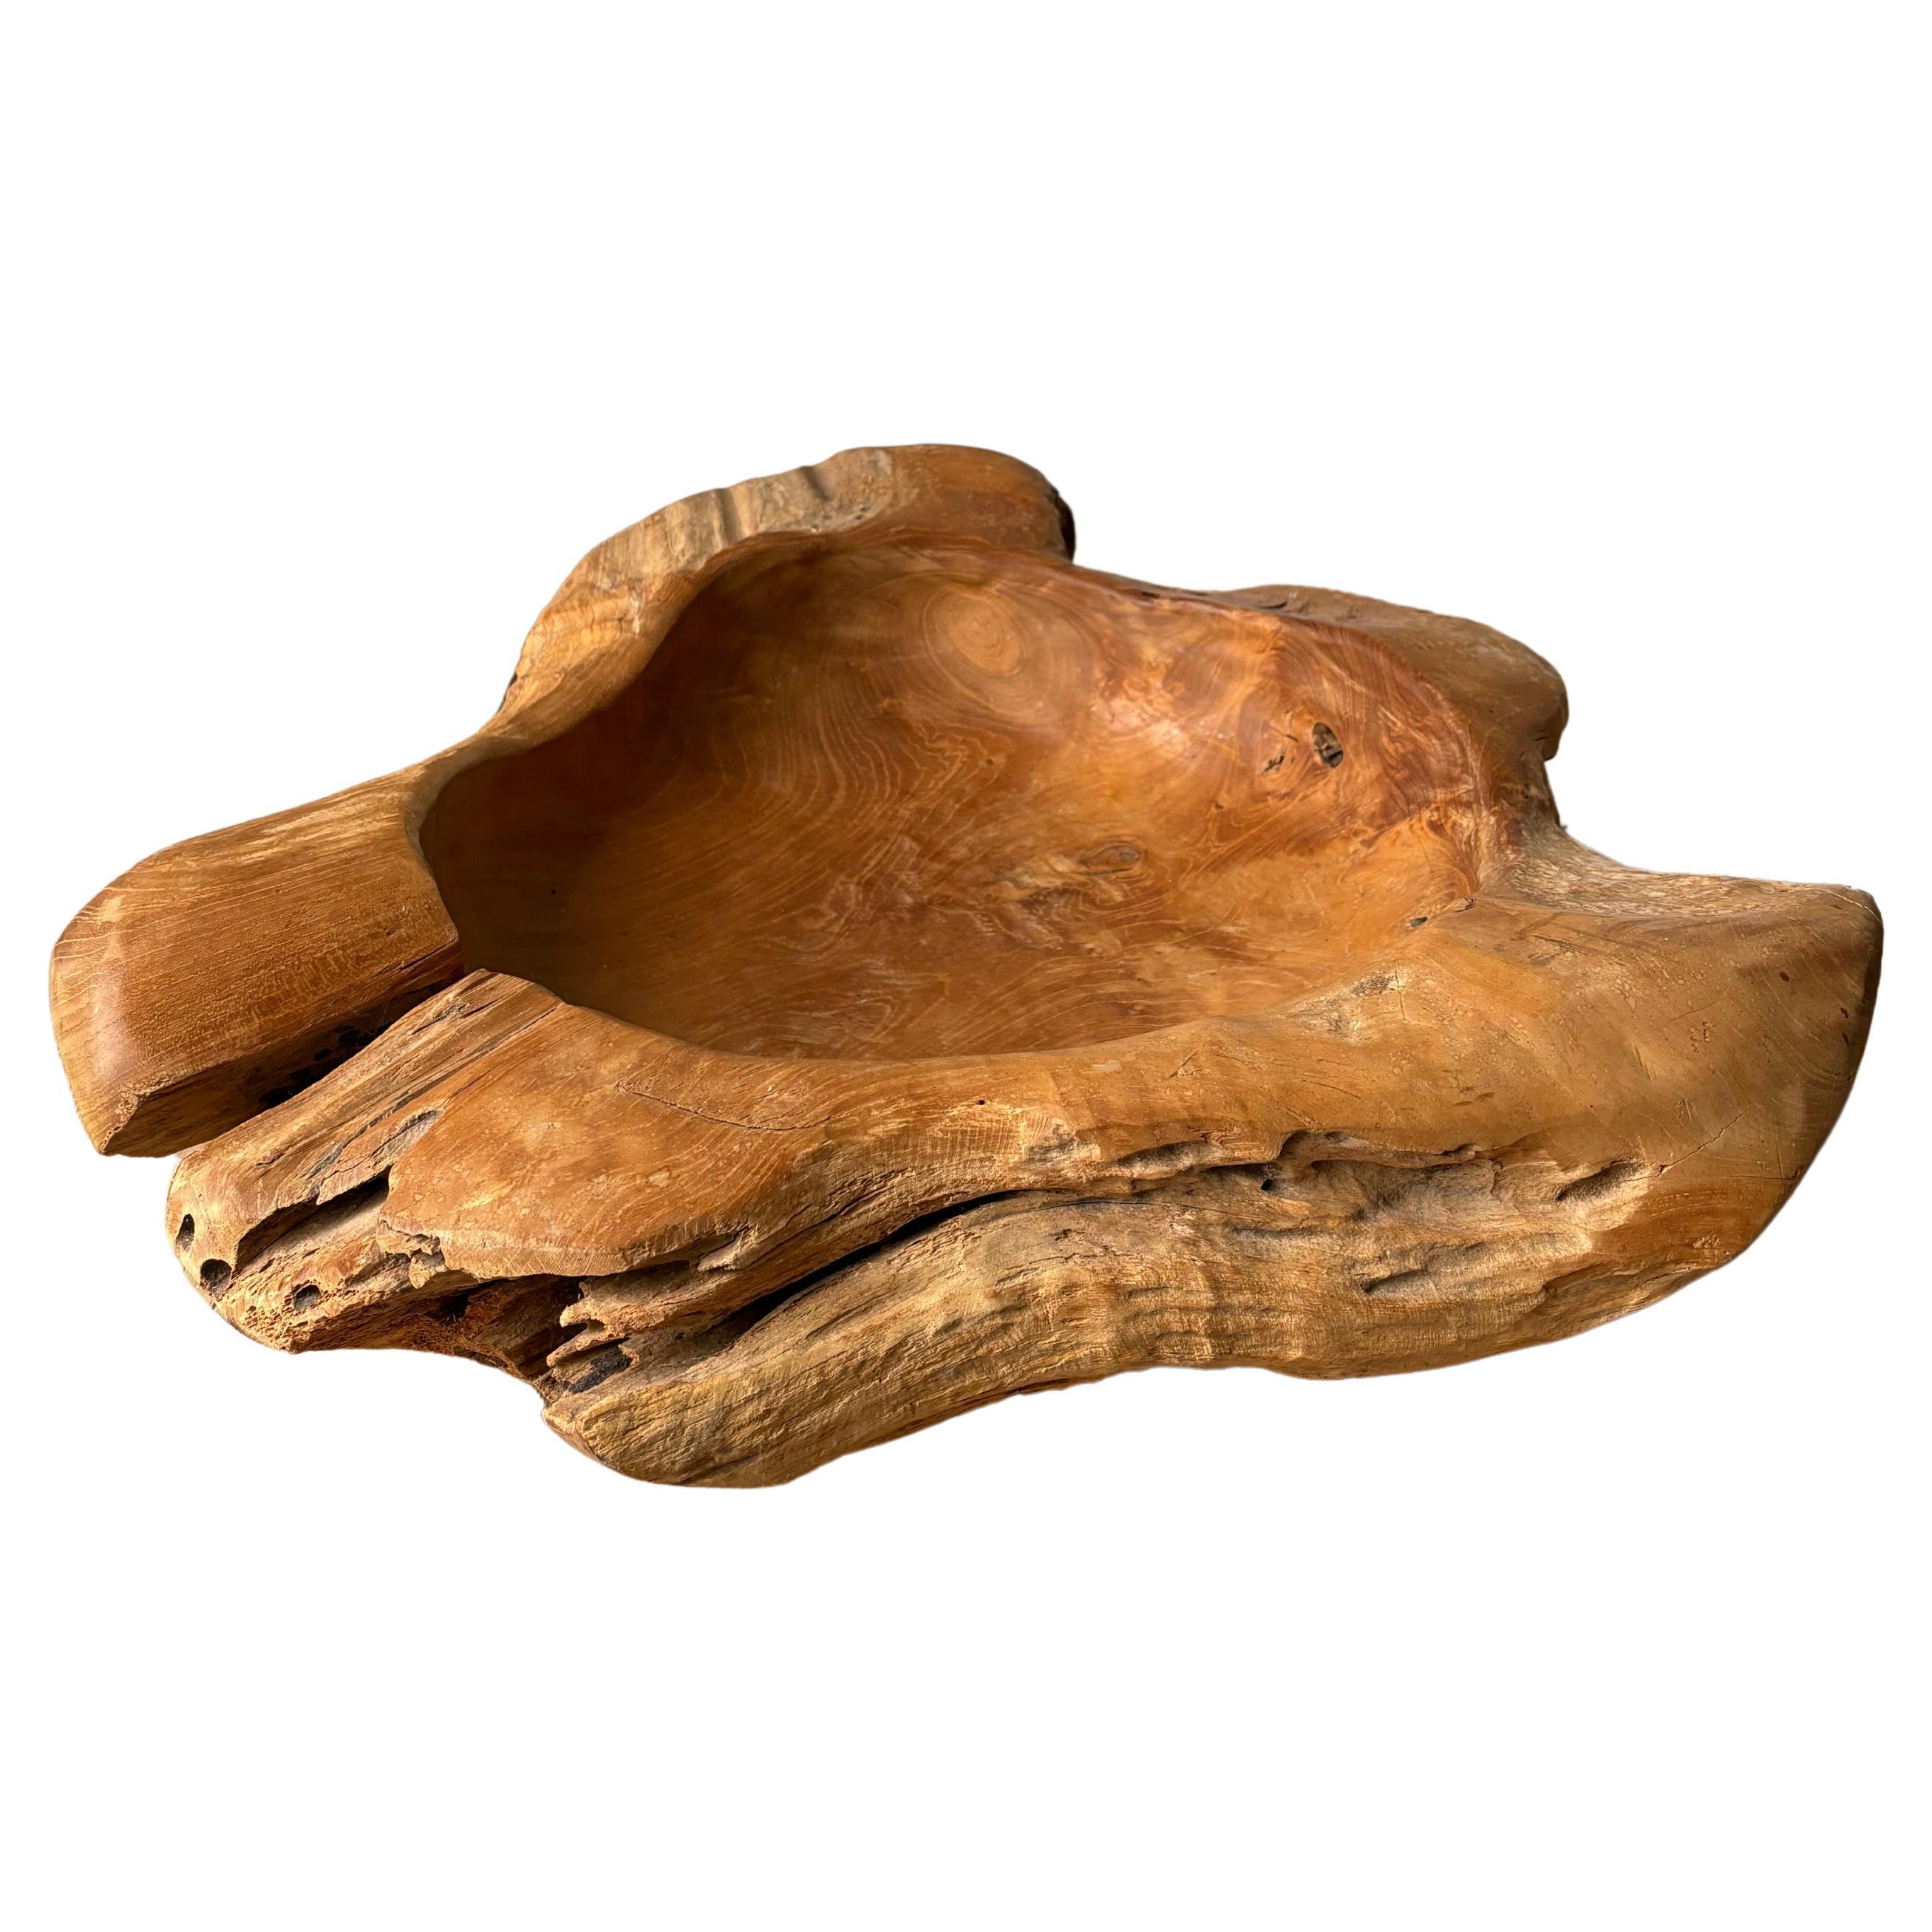 X-Large Vintage French Olive Wood Bowl, Early 20th Century For Sale